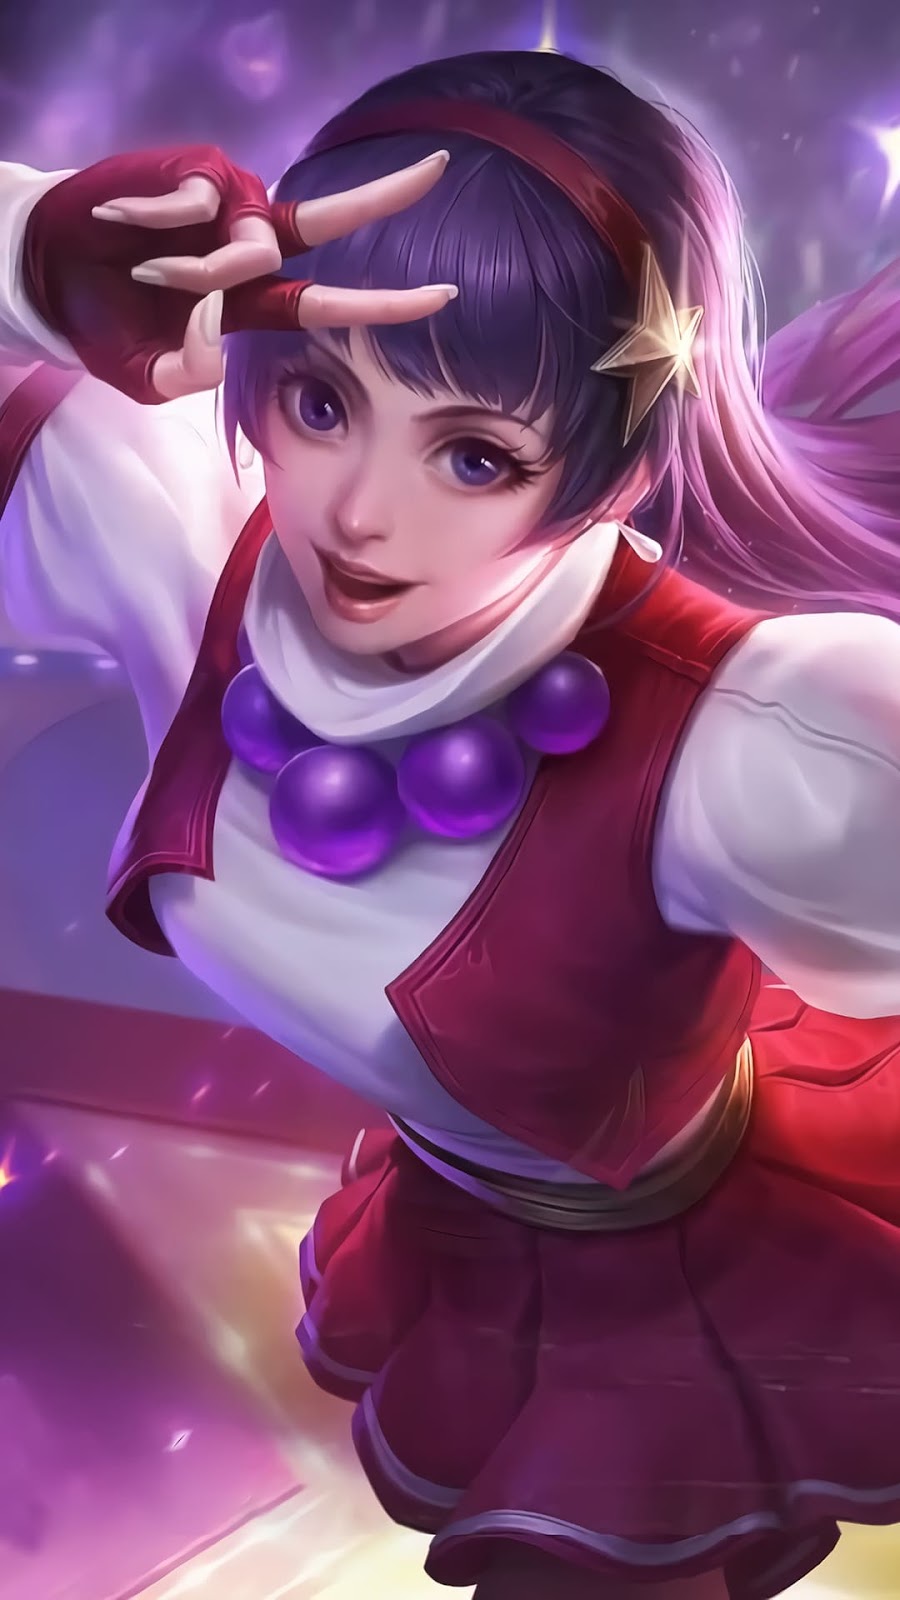 Wallpaper Guinevere Athena Asamiya KOF Skin Mobile Legends HD for Android and iOS